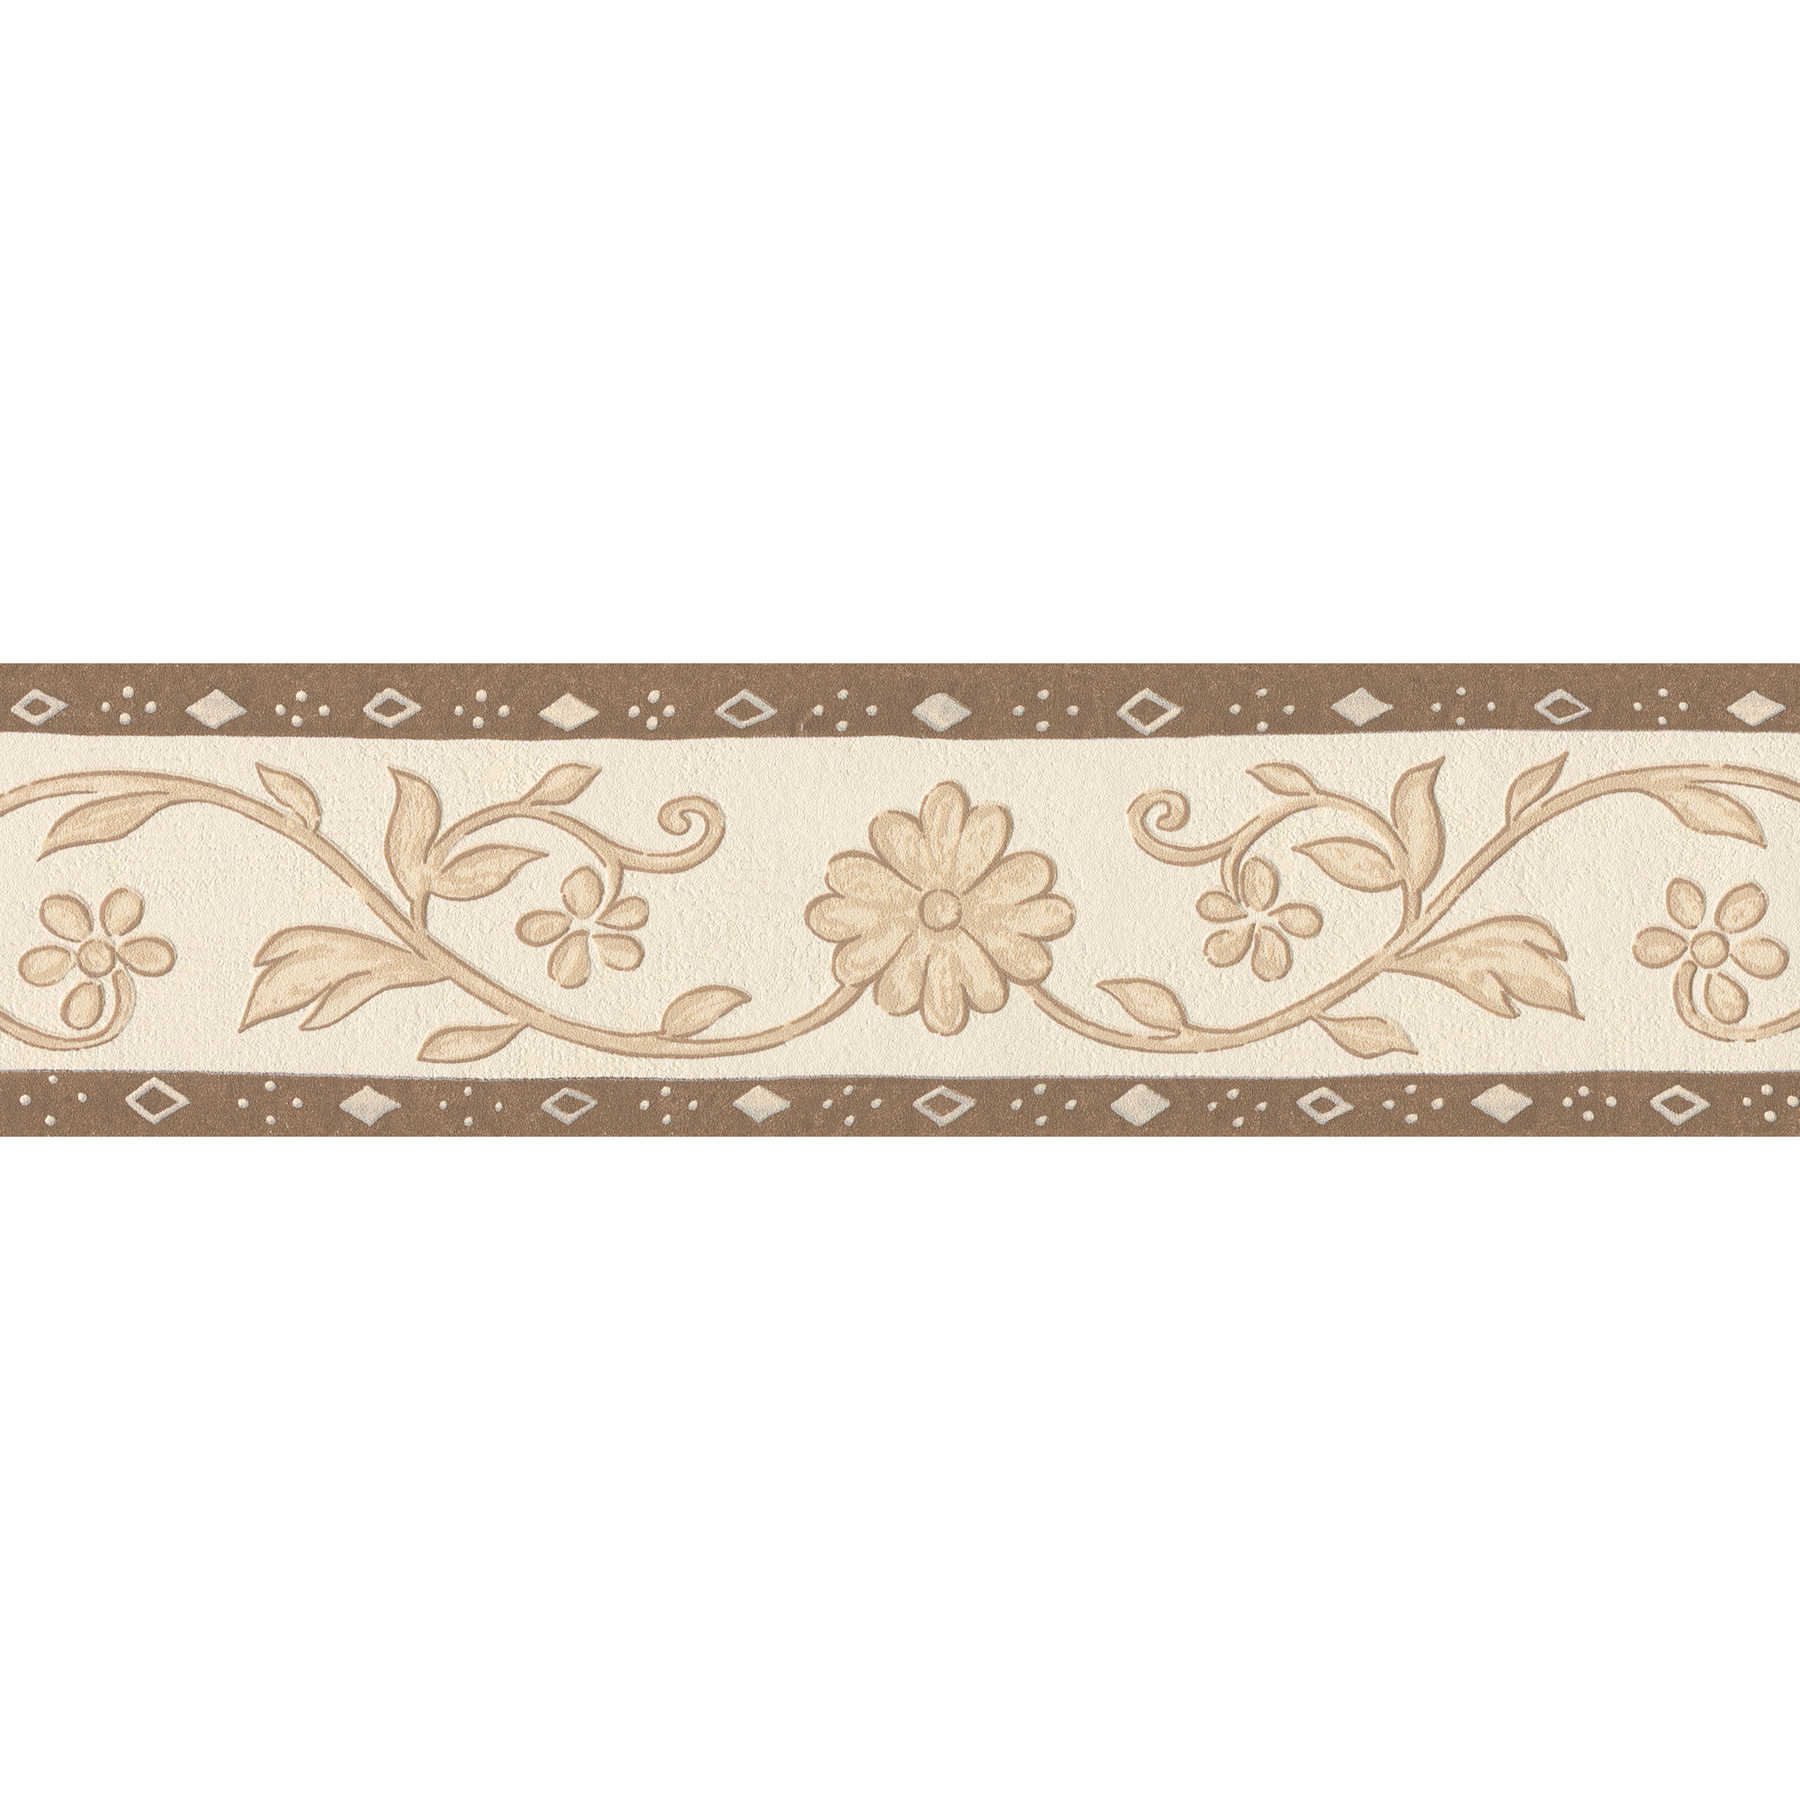         Classic wallpaper border with floral pattern - beige, brown
    